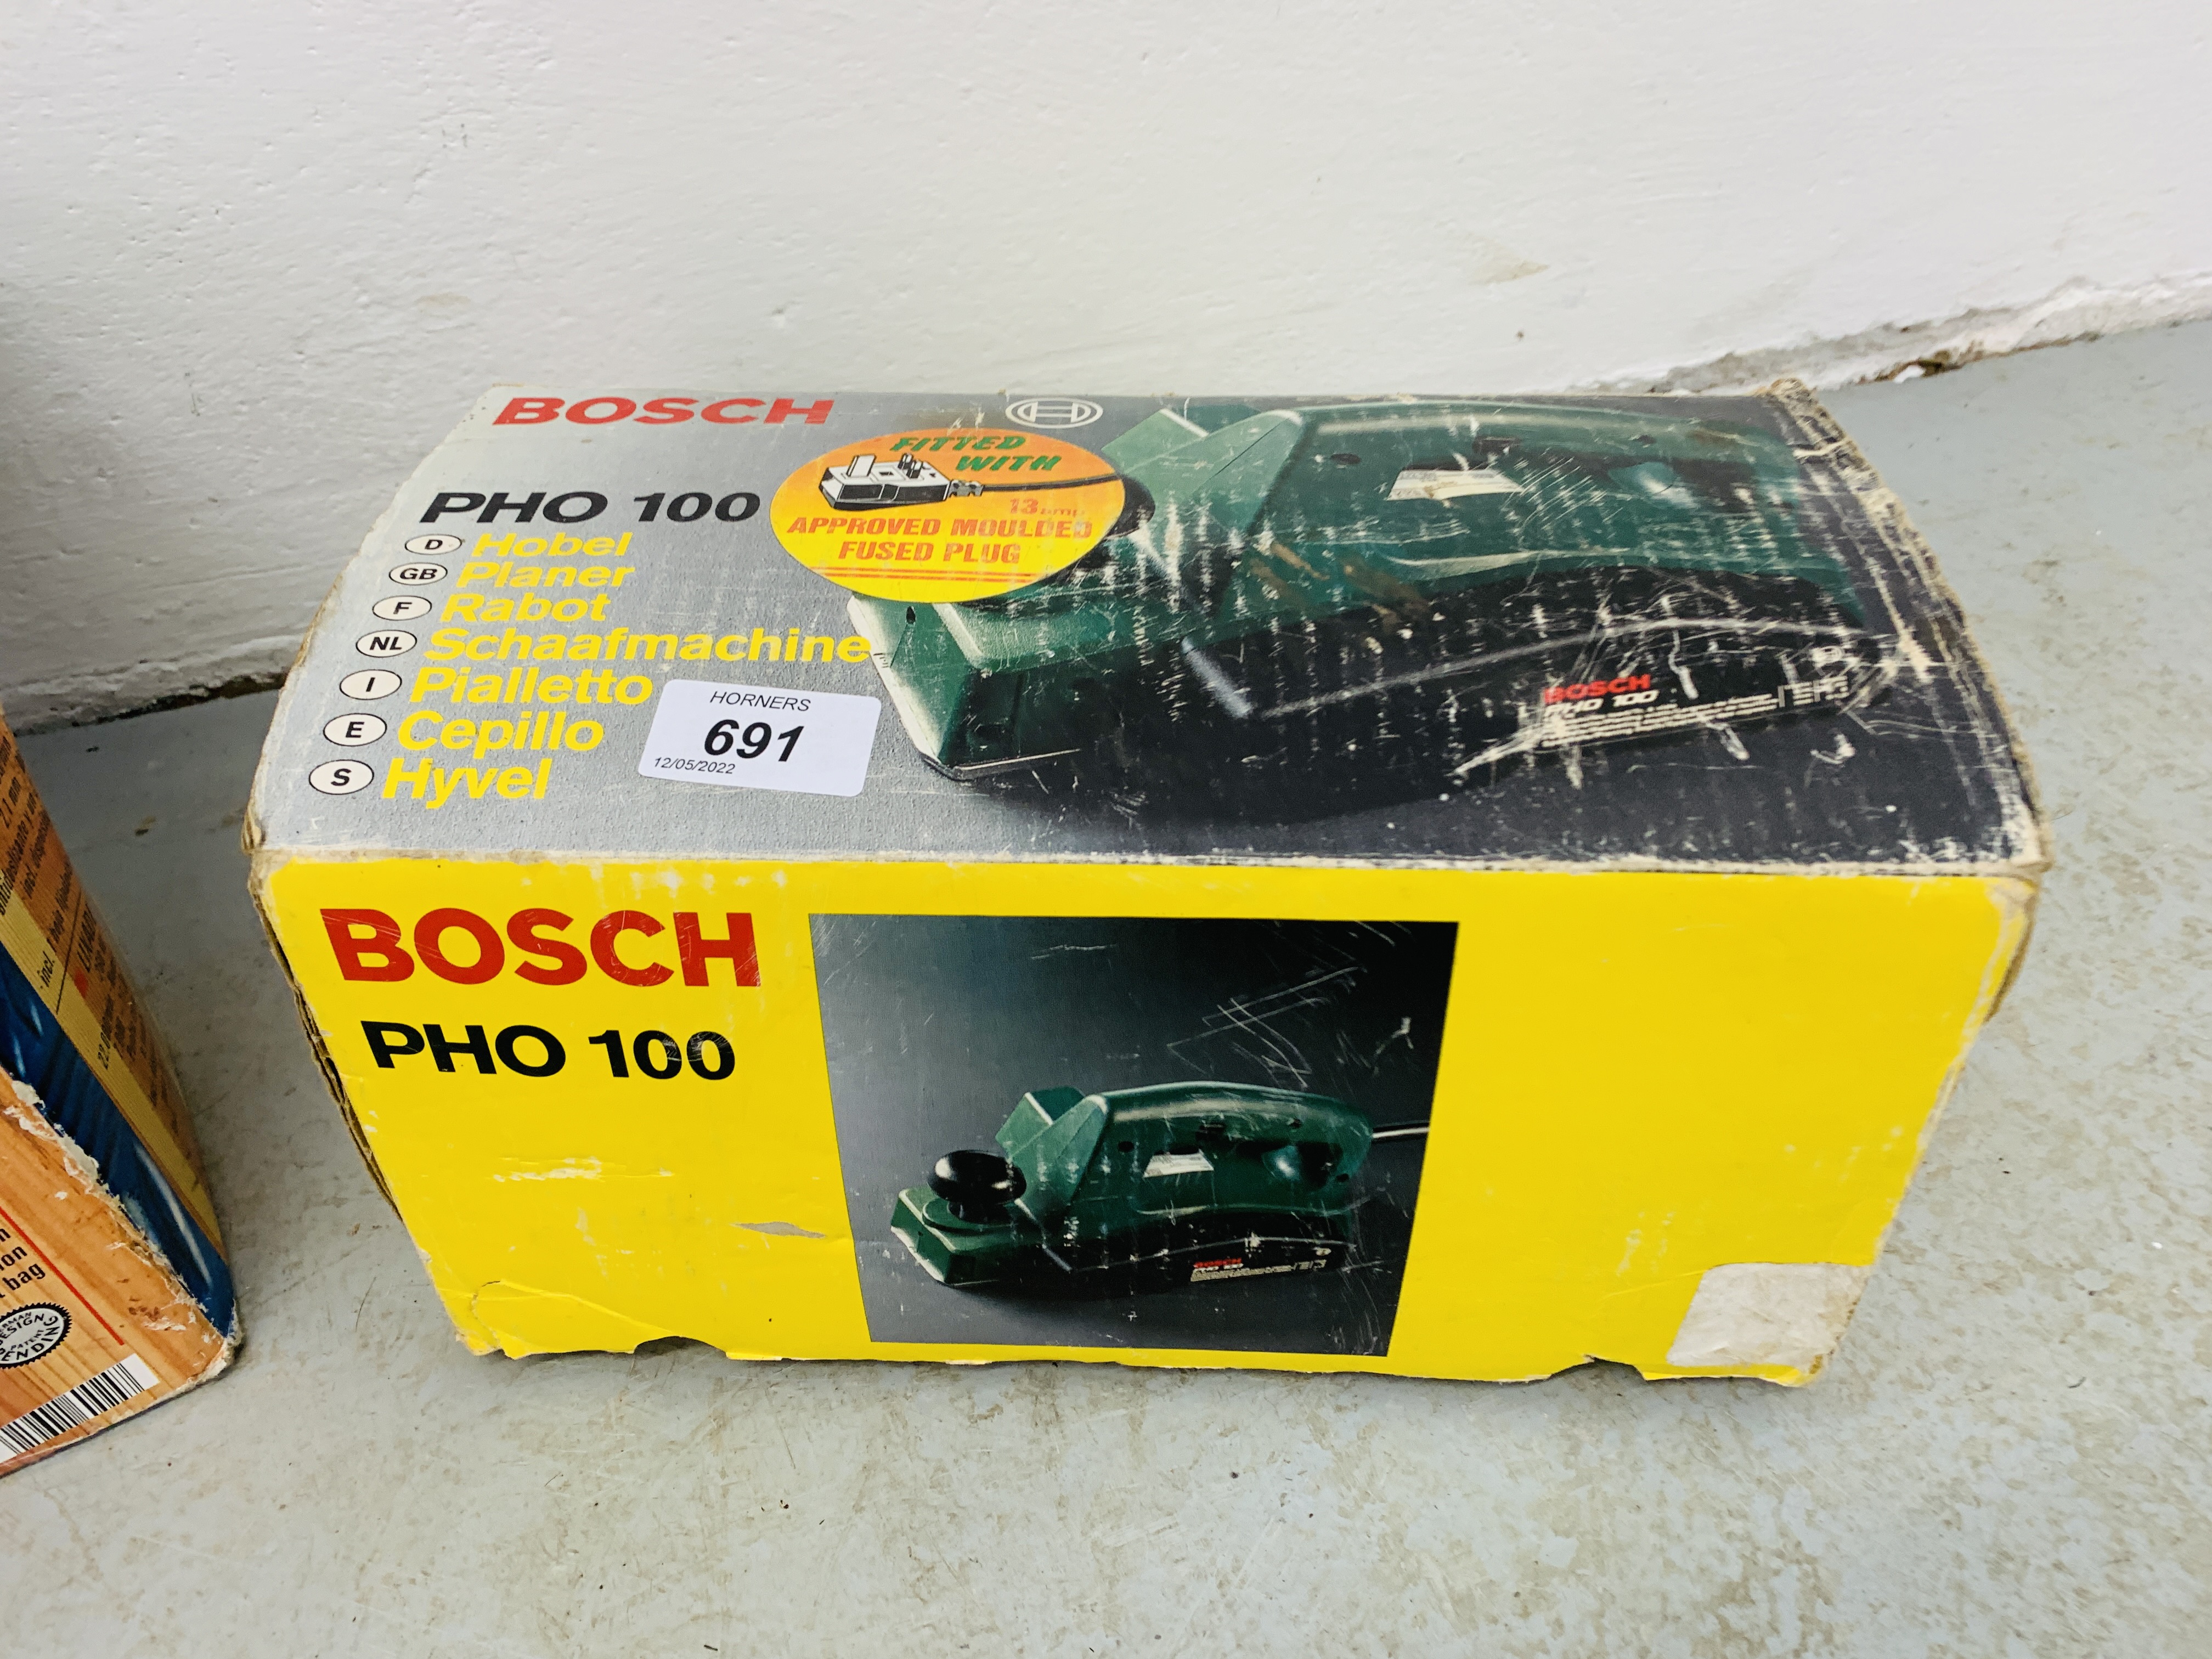 BOSCH PHO 100 ELECTRIC PLANER AND TWO PARKSIDE ELECTRIC ORBITAL SANDERS - SOLD AS SEEN - Image 2 of 6